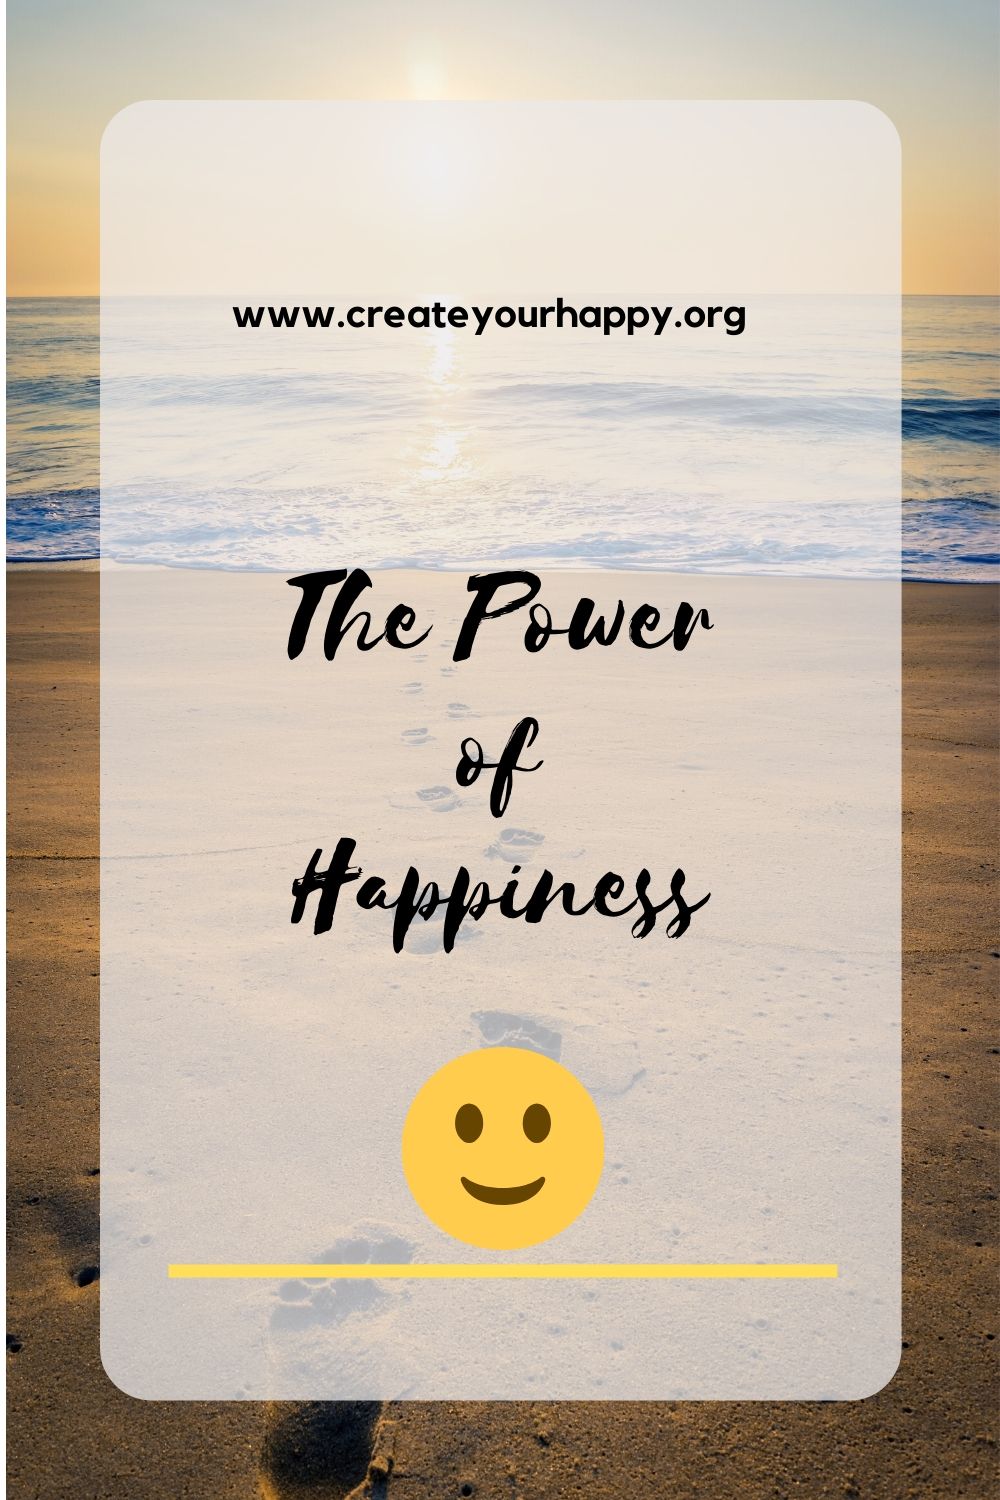 The Power of Happiness